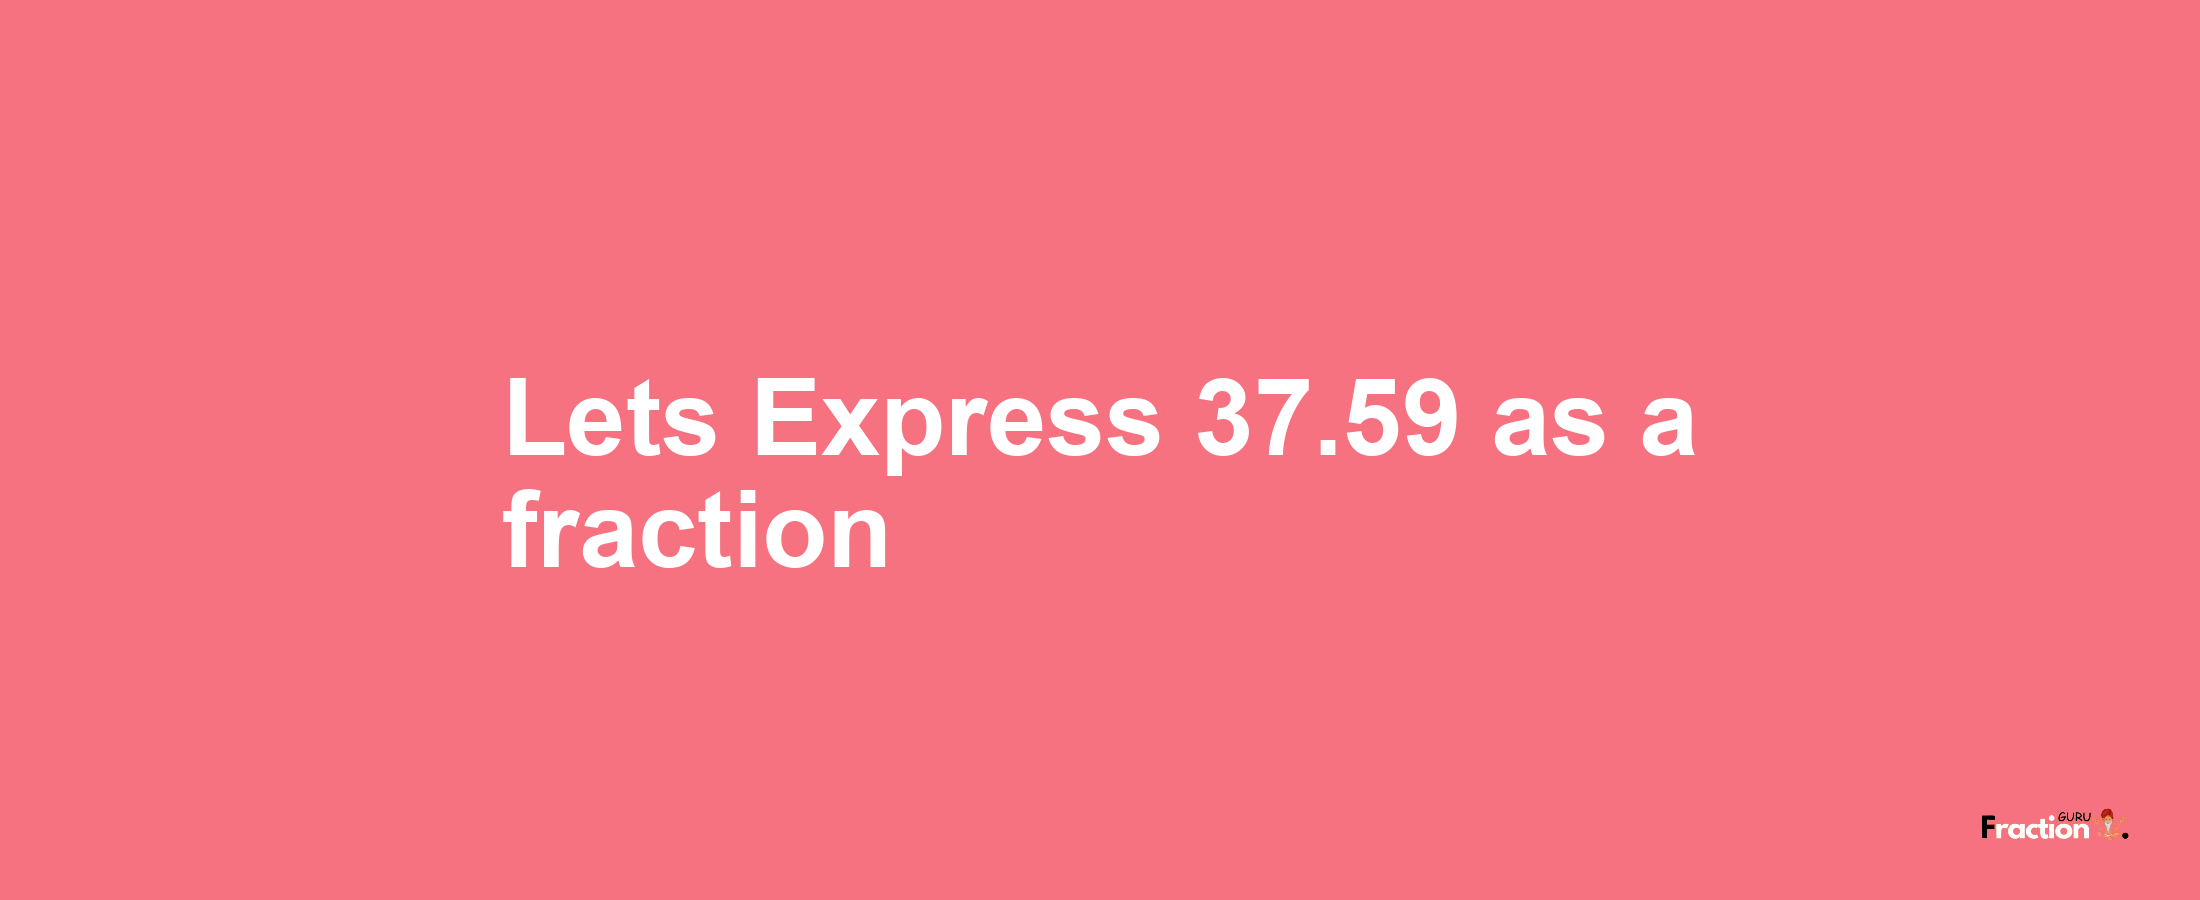 Lets Express 37.59 as afraction